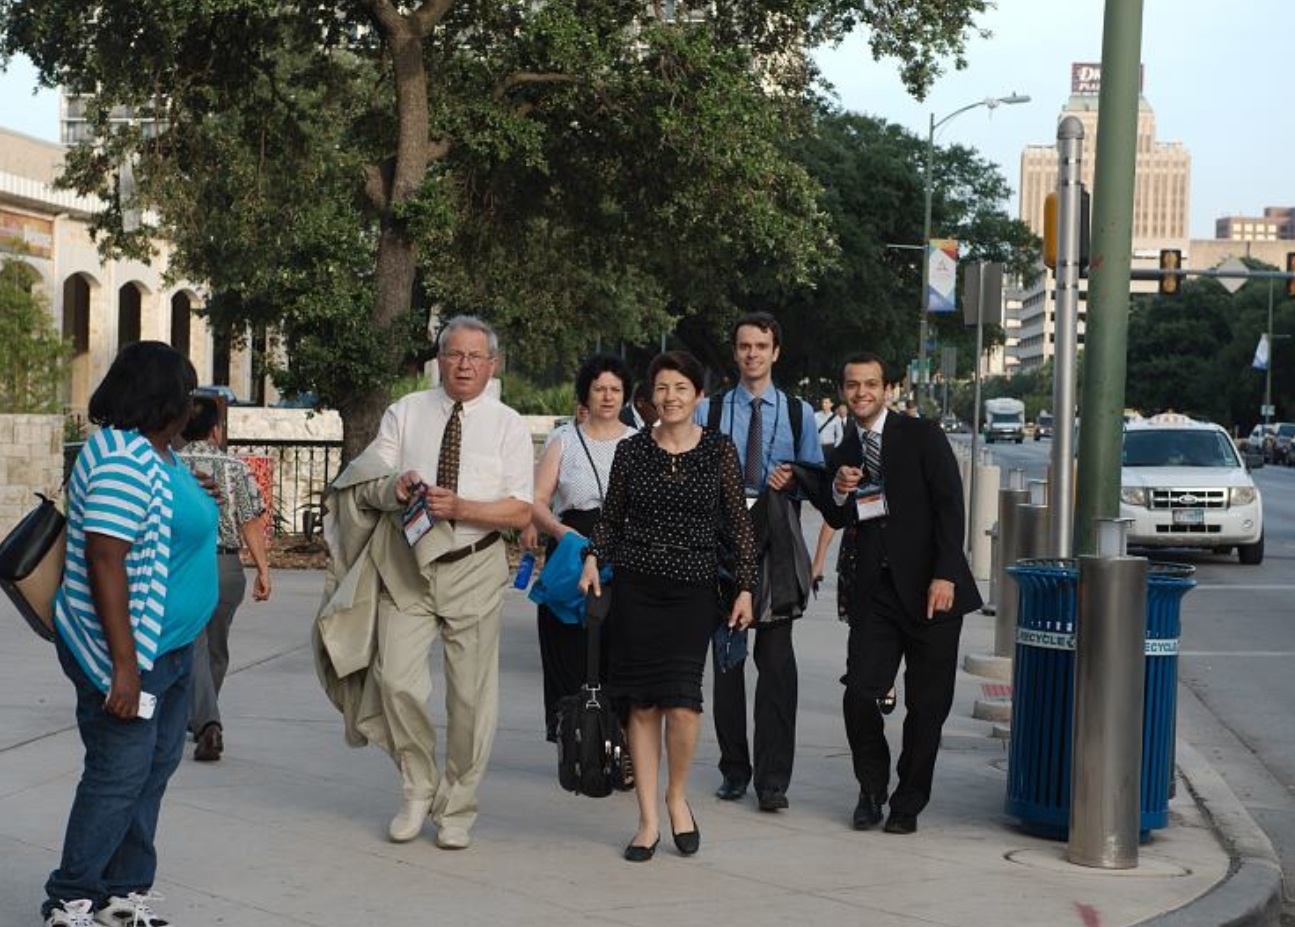 Adventists are strolling around San Antonio with purpose and a growing sense of ownership